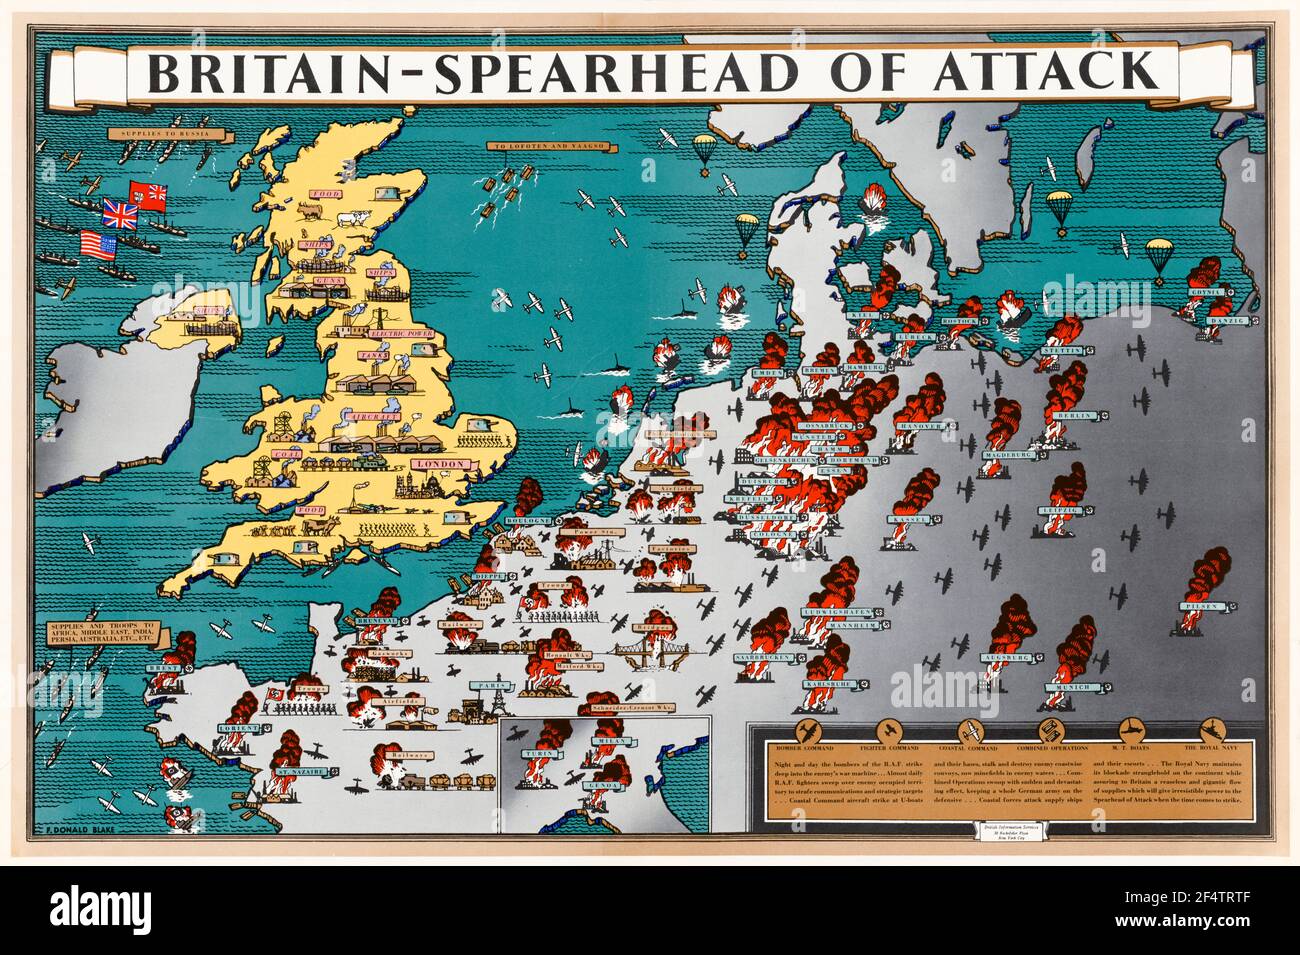 British, WW2, Britain: Spearhead of Attack, Poster Map showing how wartime manufacture helped military action liberate occupied Europe, 1942-1945 Stock Photo